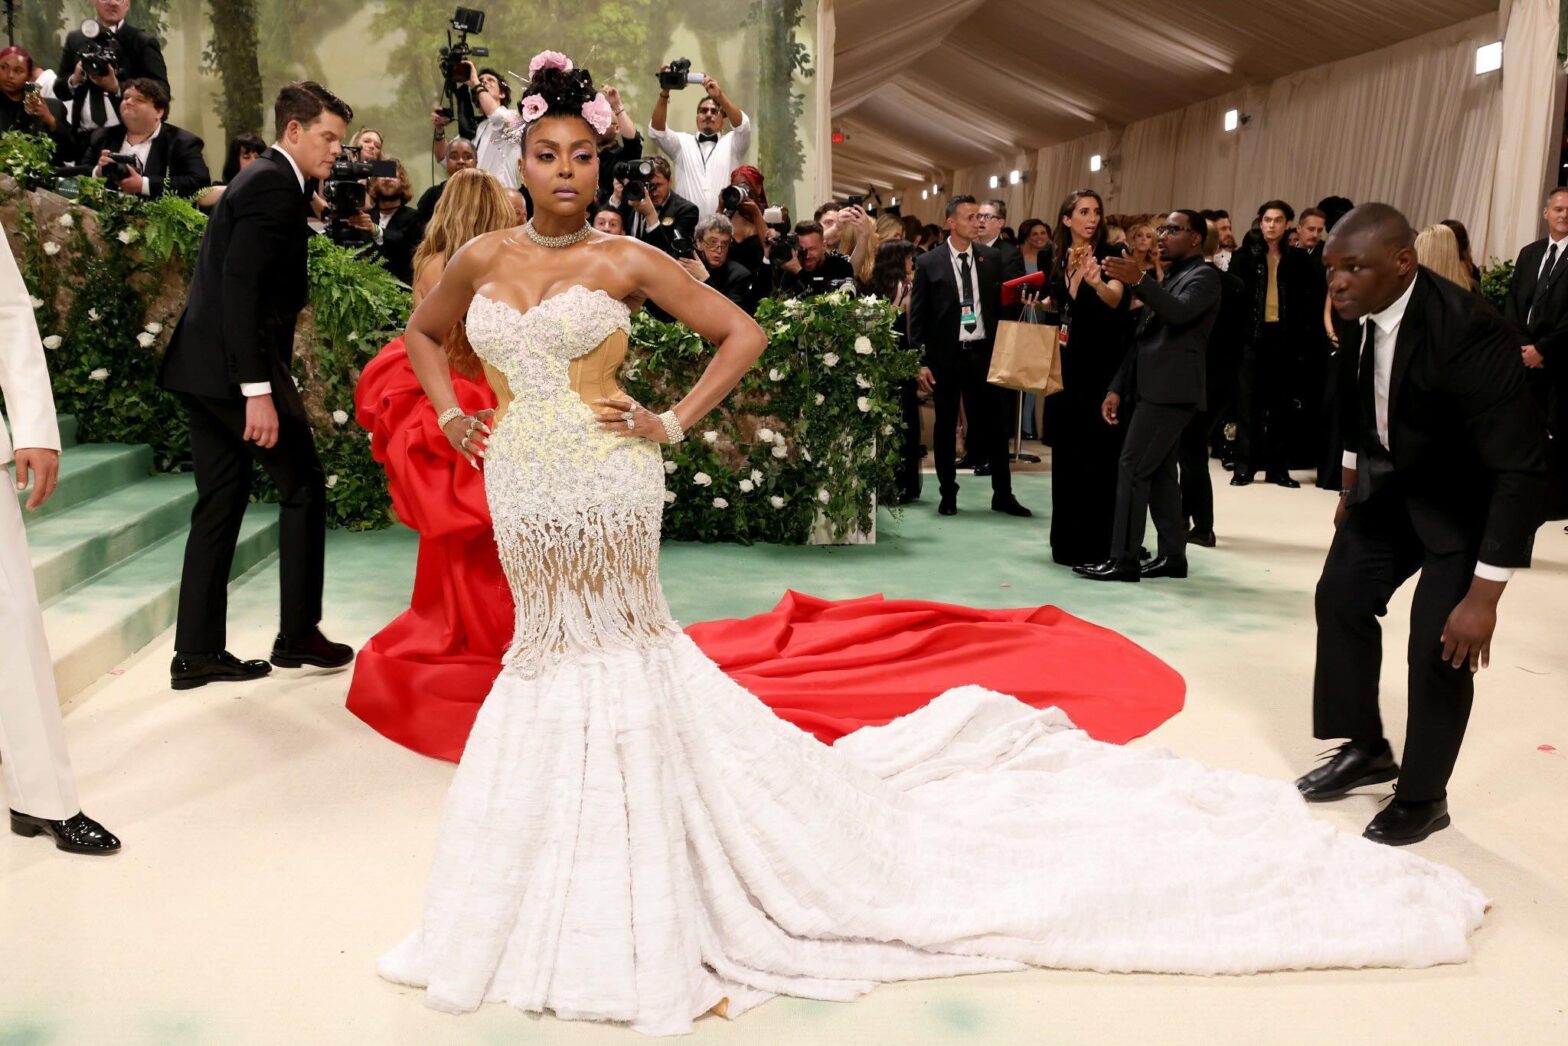 Taraji P. Henson wearing a gown, on the red carpet while at the Met Gala